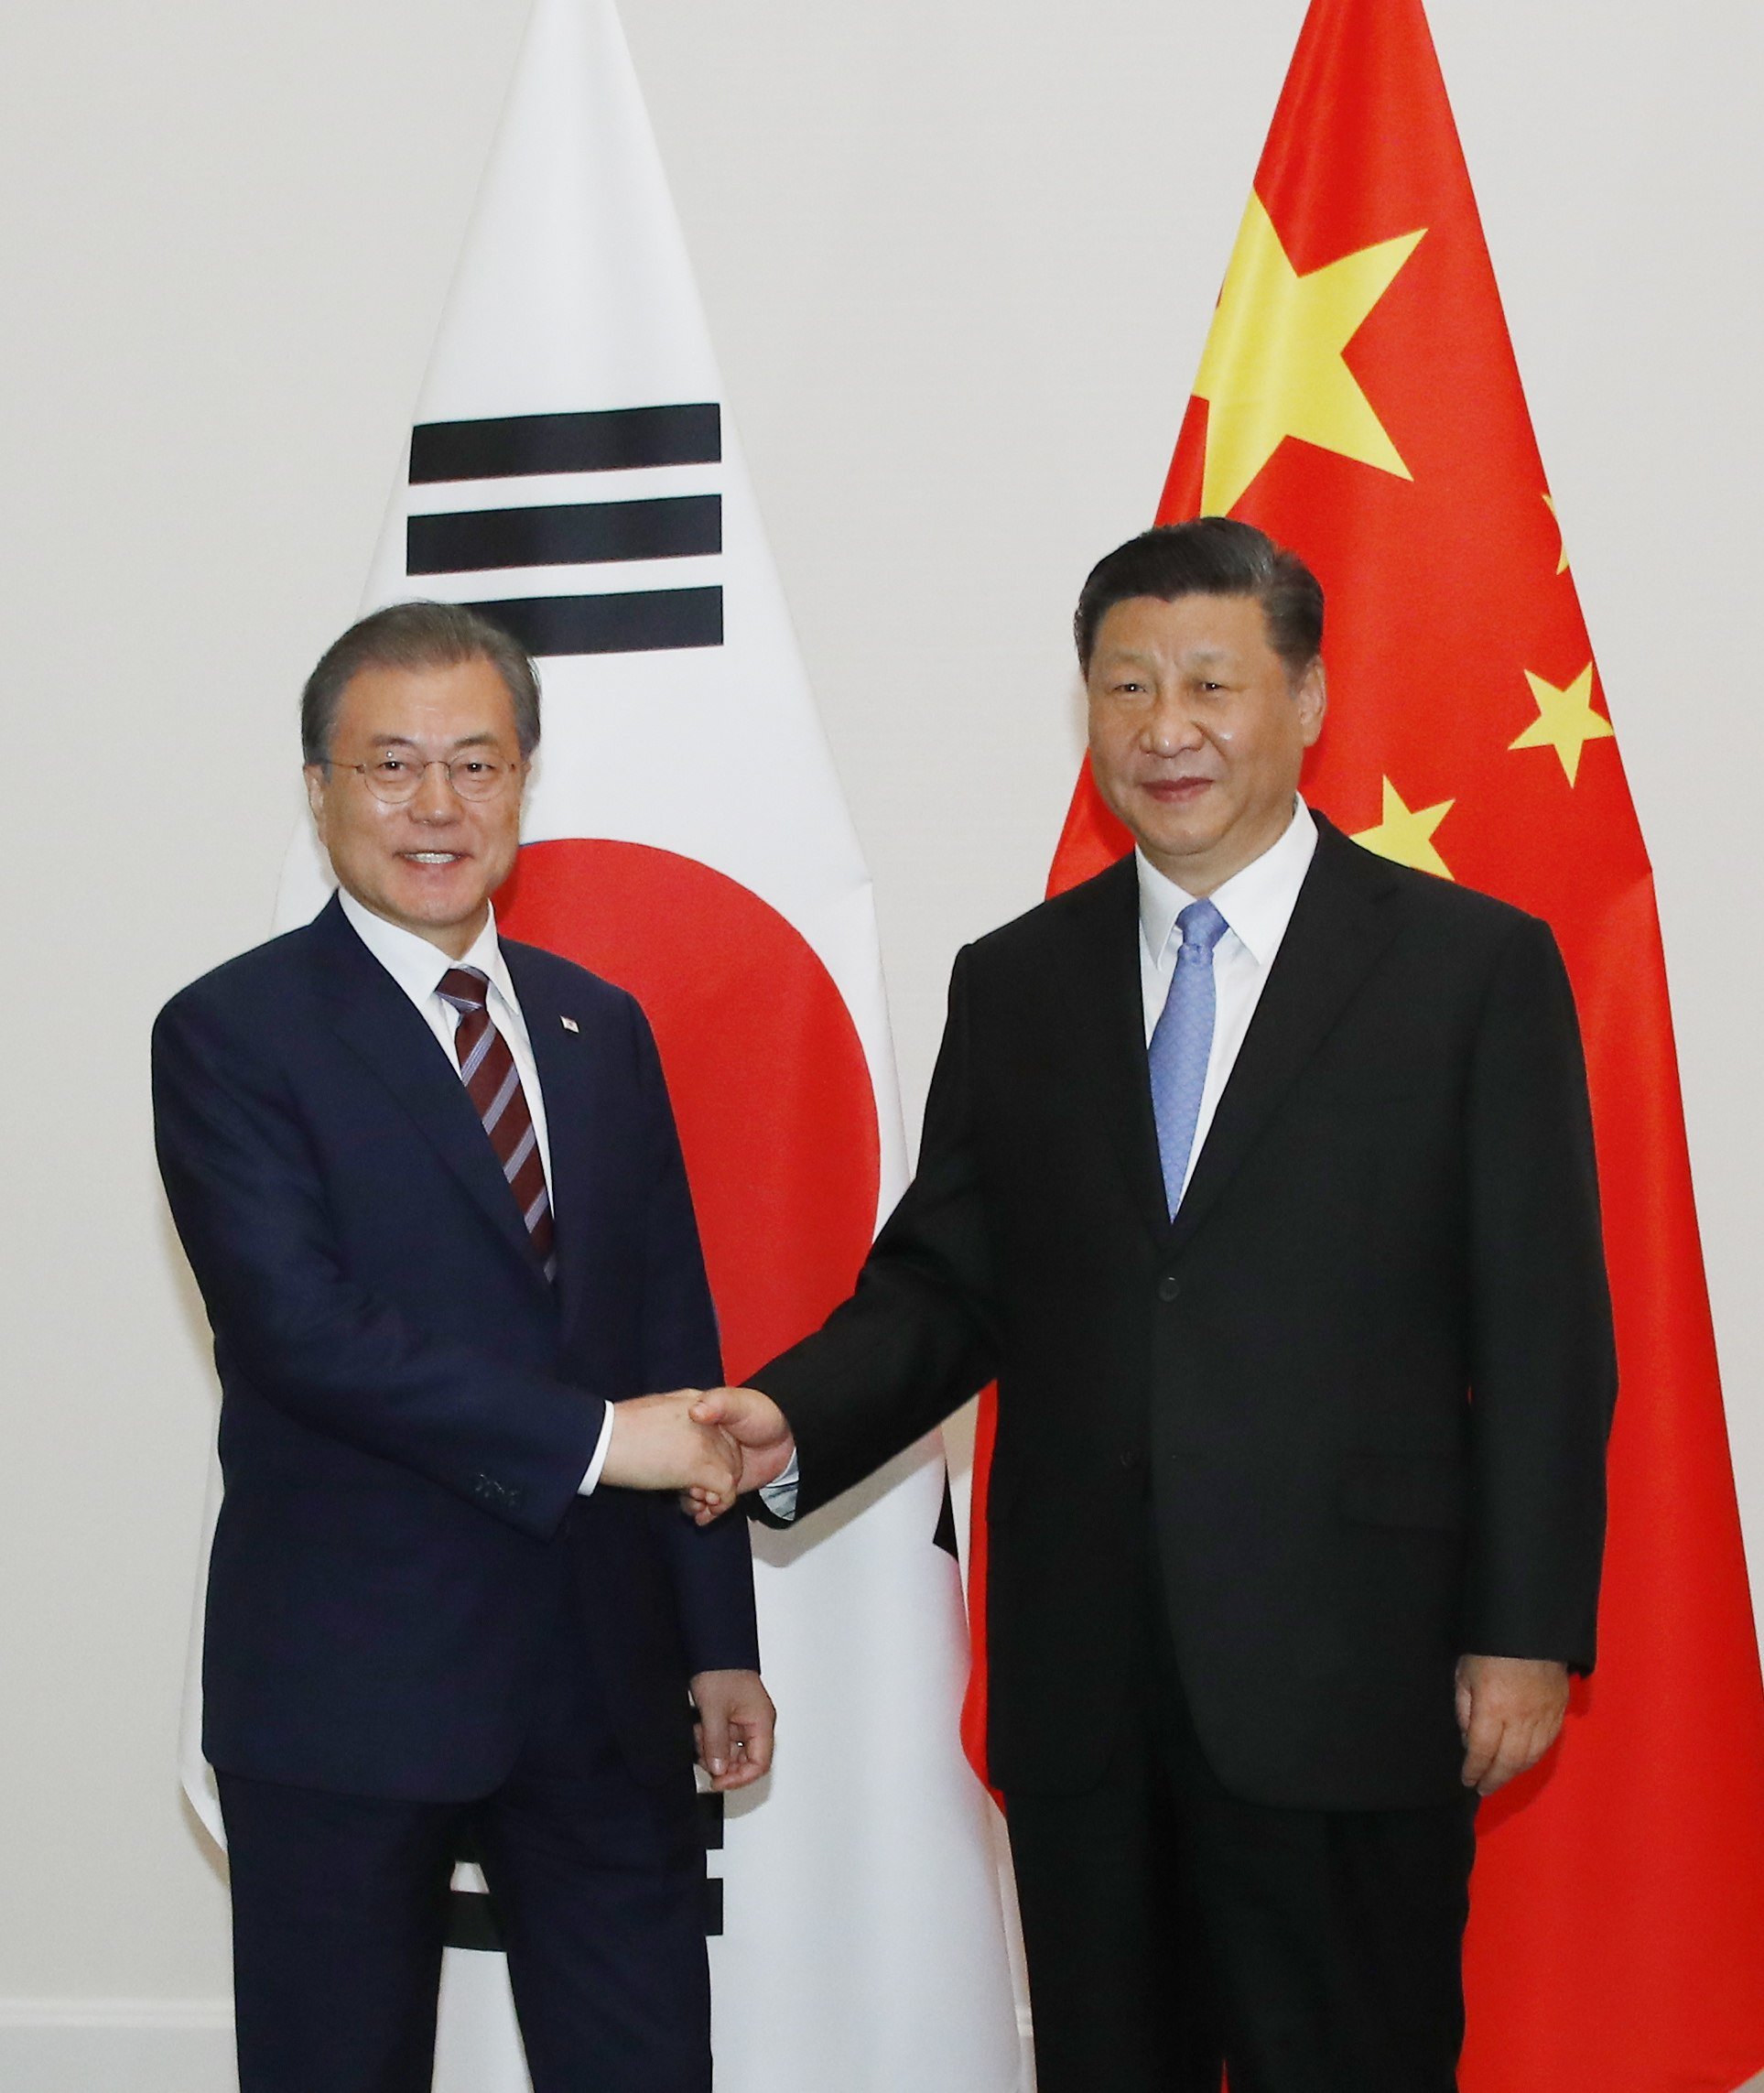 President Moon Jae-in (left) pictured with China’s President Xi Jinping prior to talks in Osaka on June 27, 2019. Photo: EPA-EFE